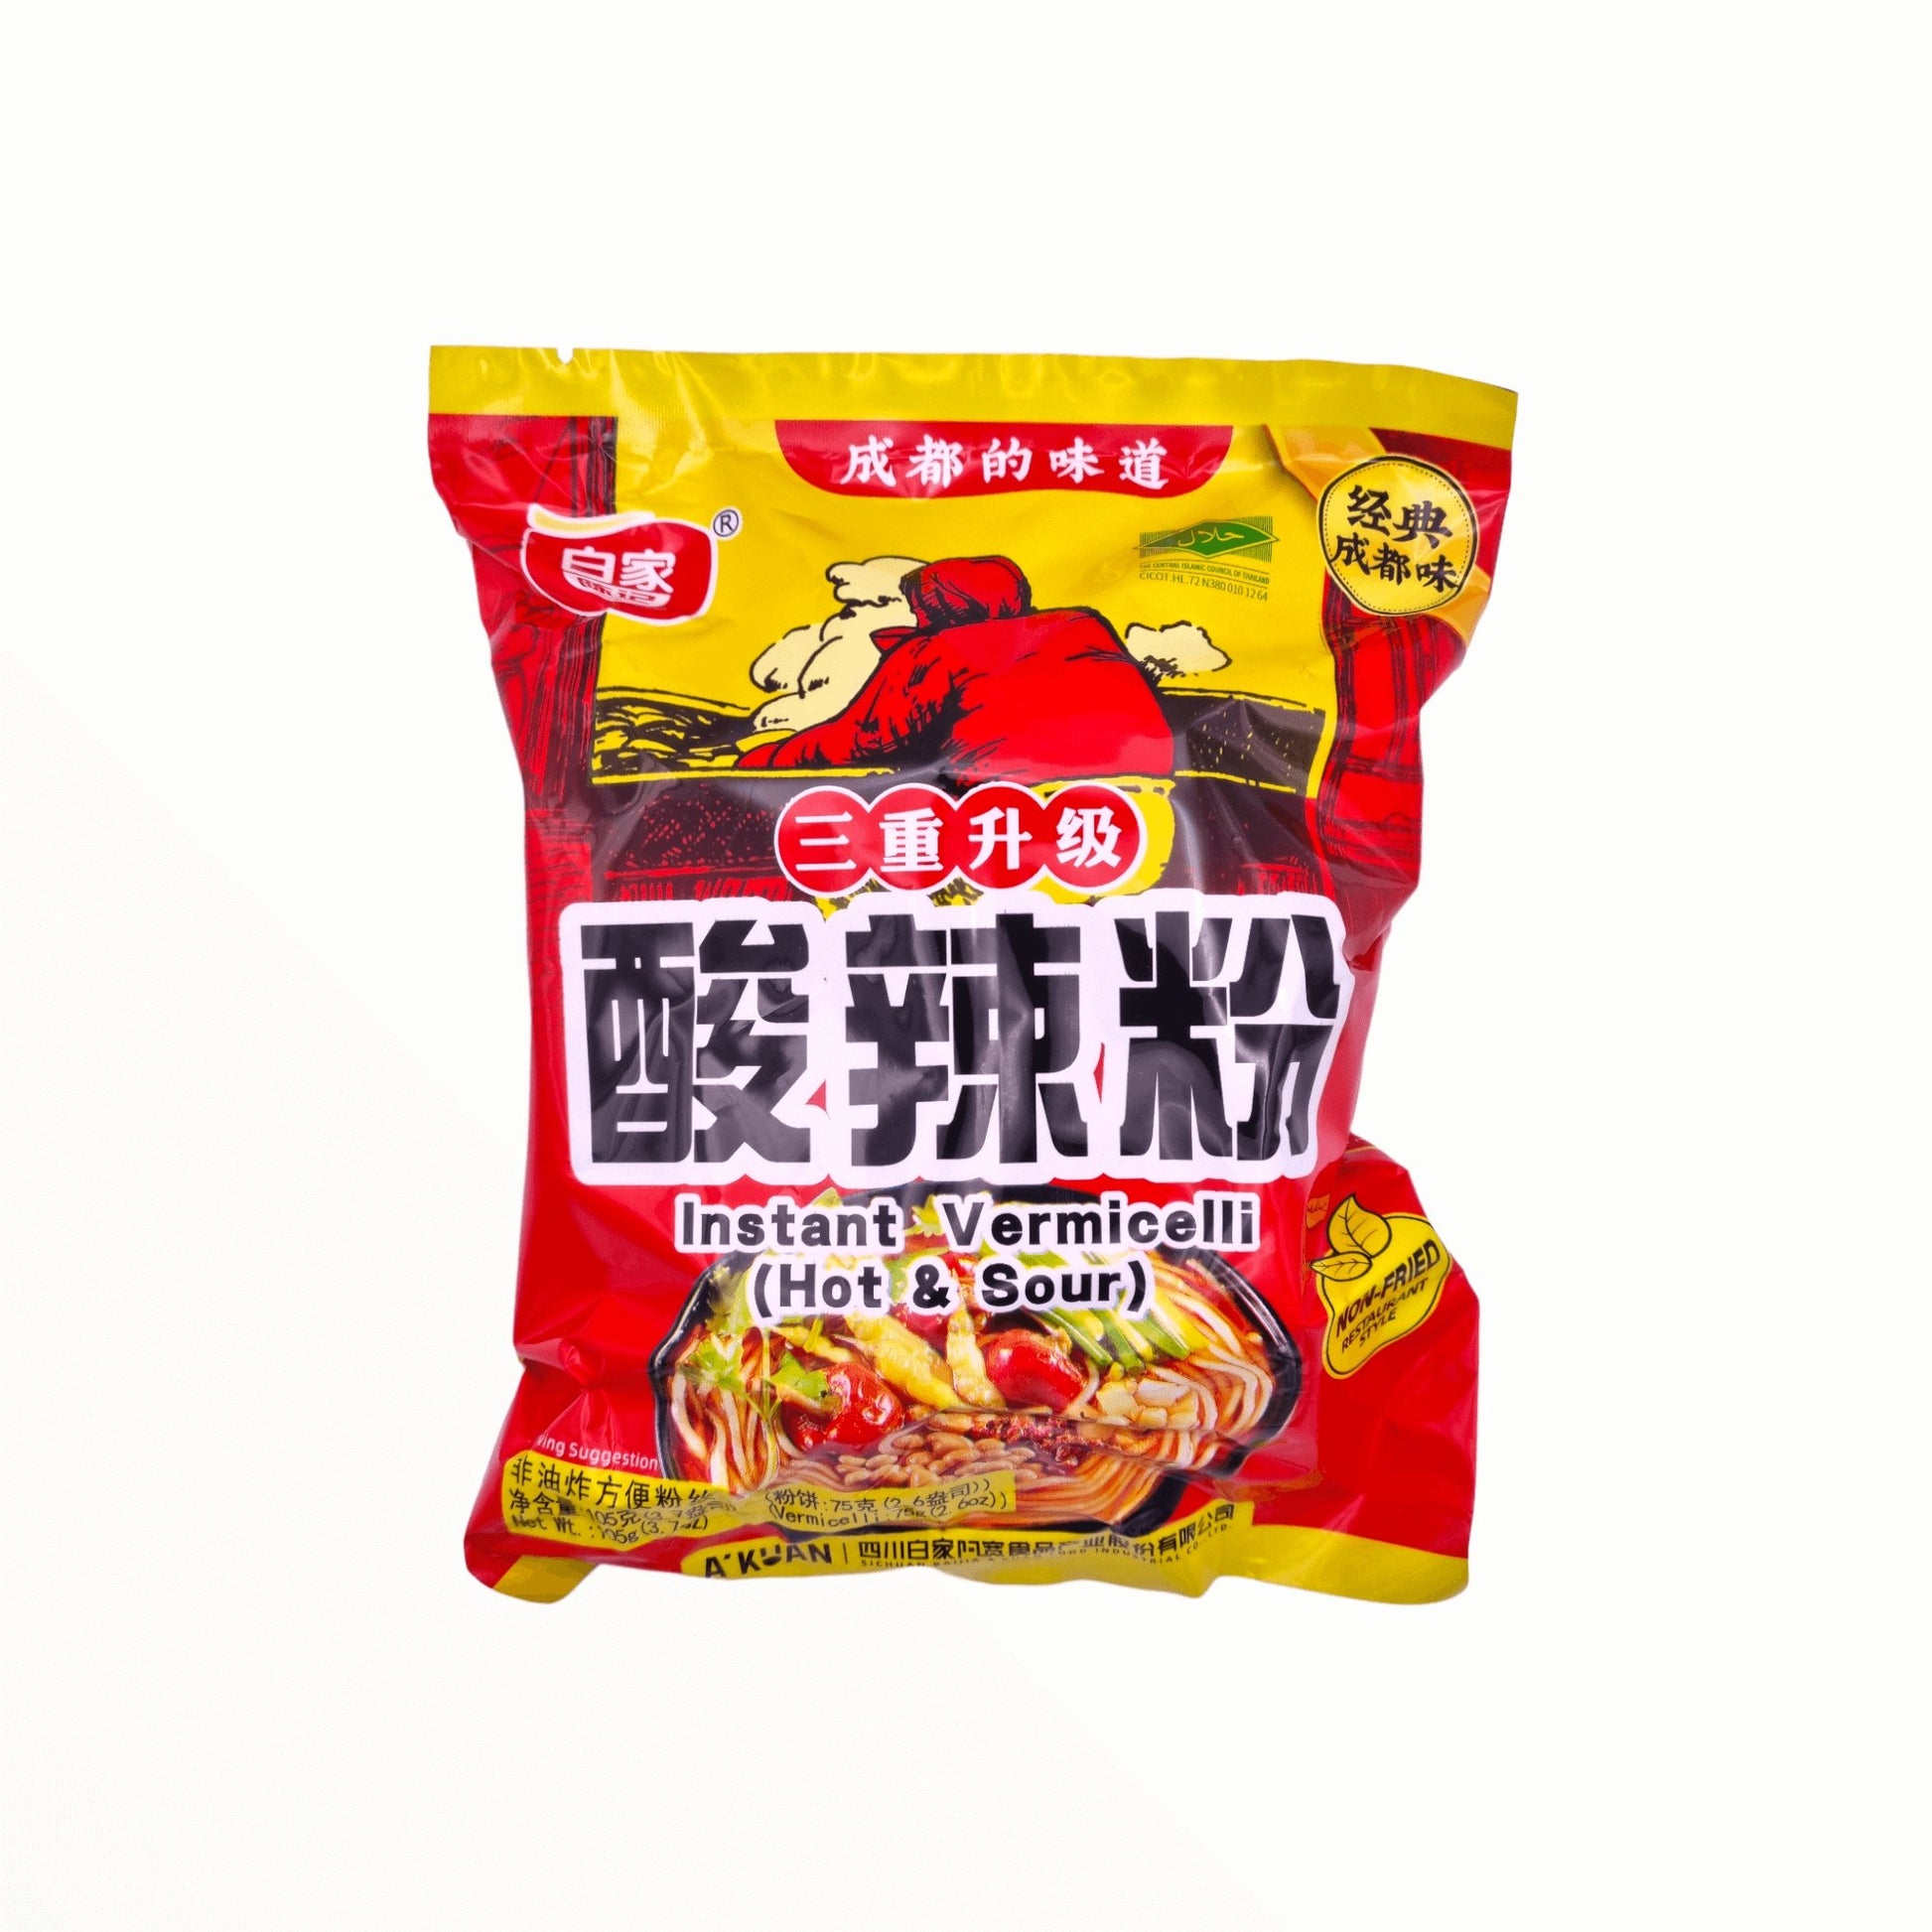 Instant Vermicelli "Hot & Sour" 105g - Mabuhay Pinoy Asia Shop